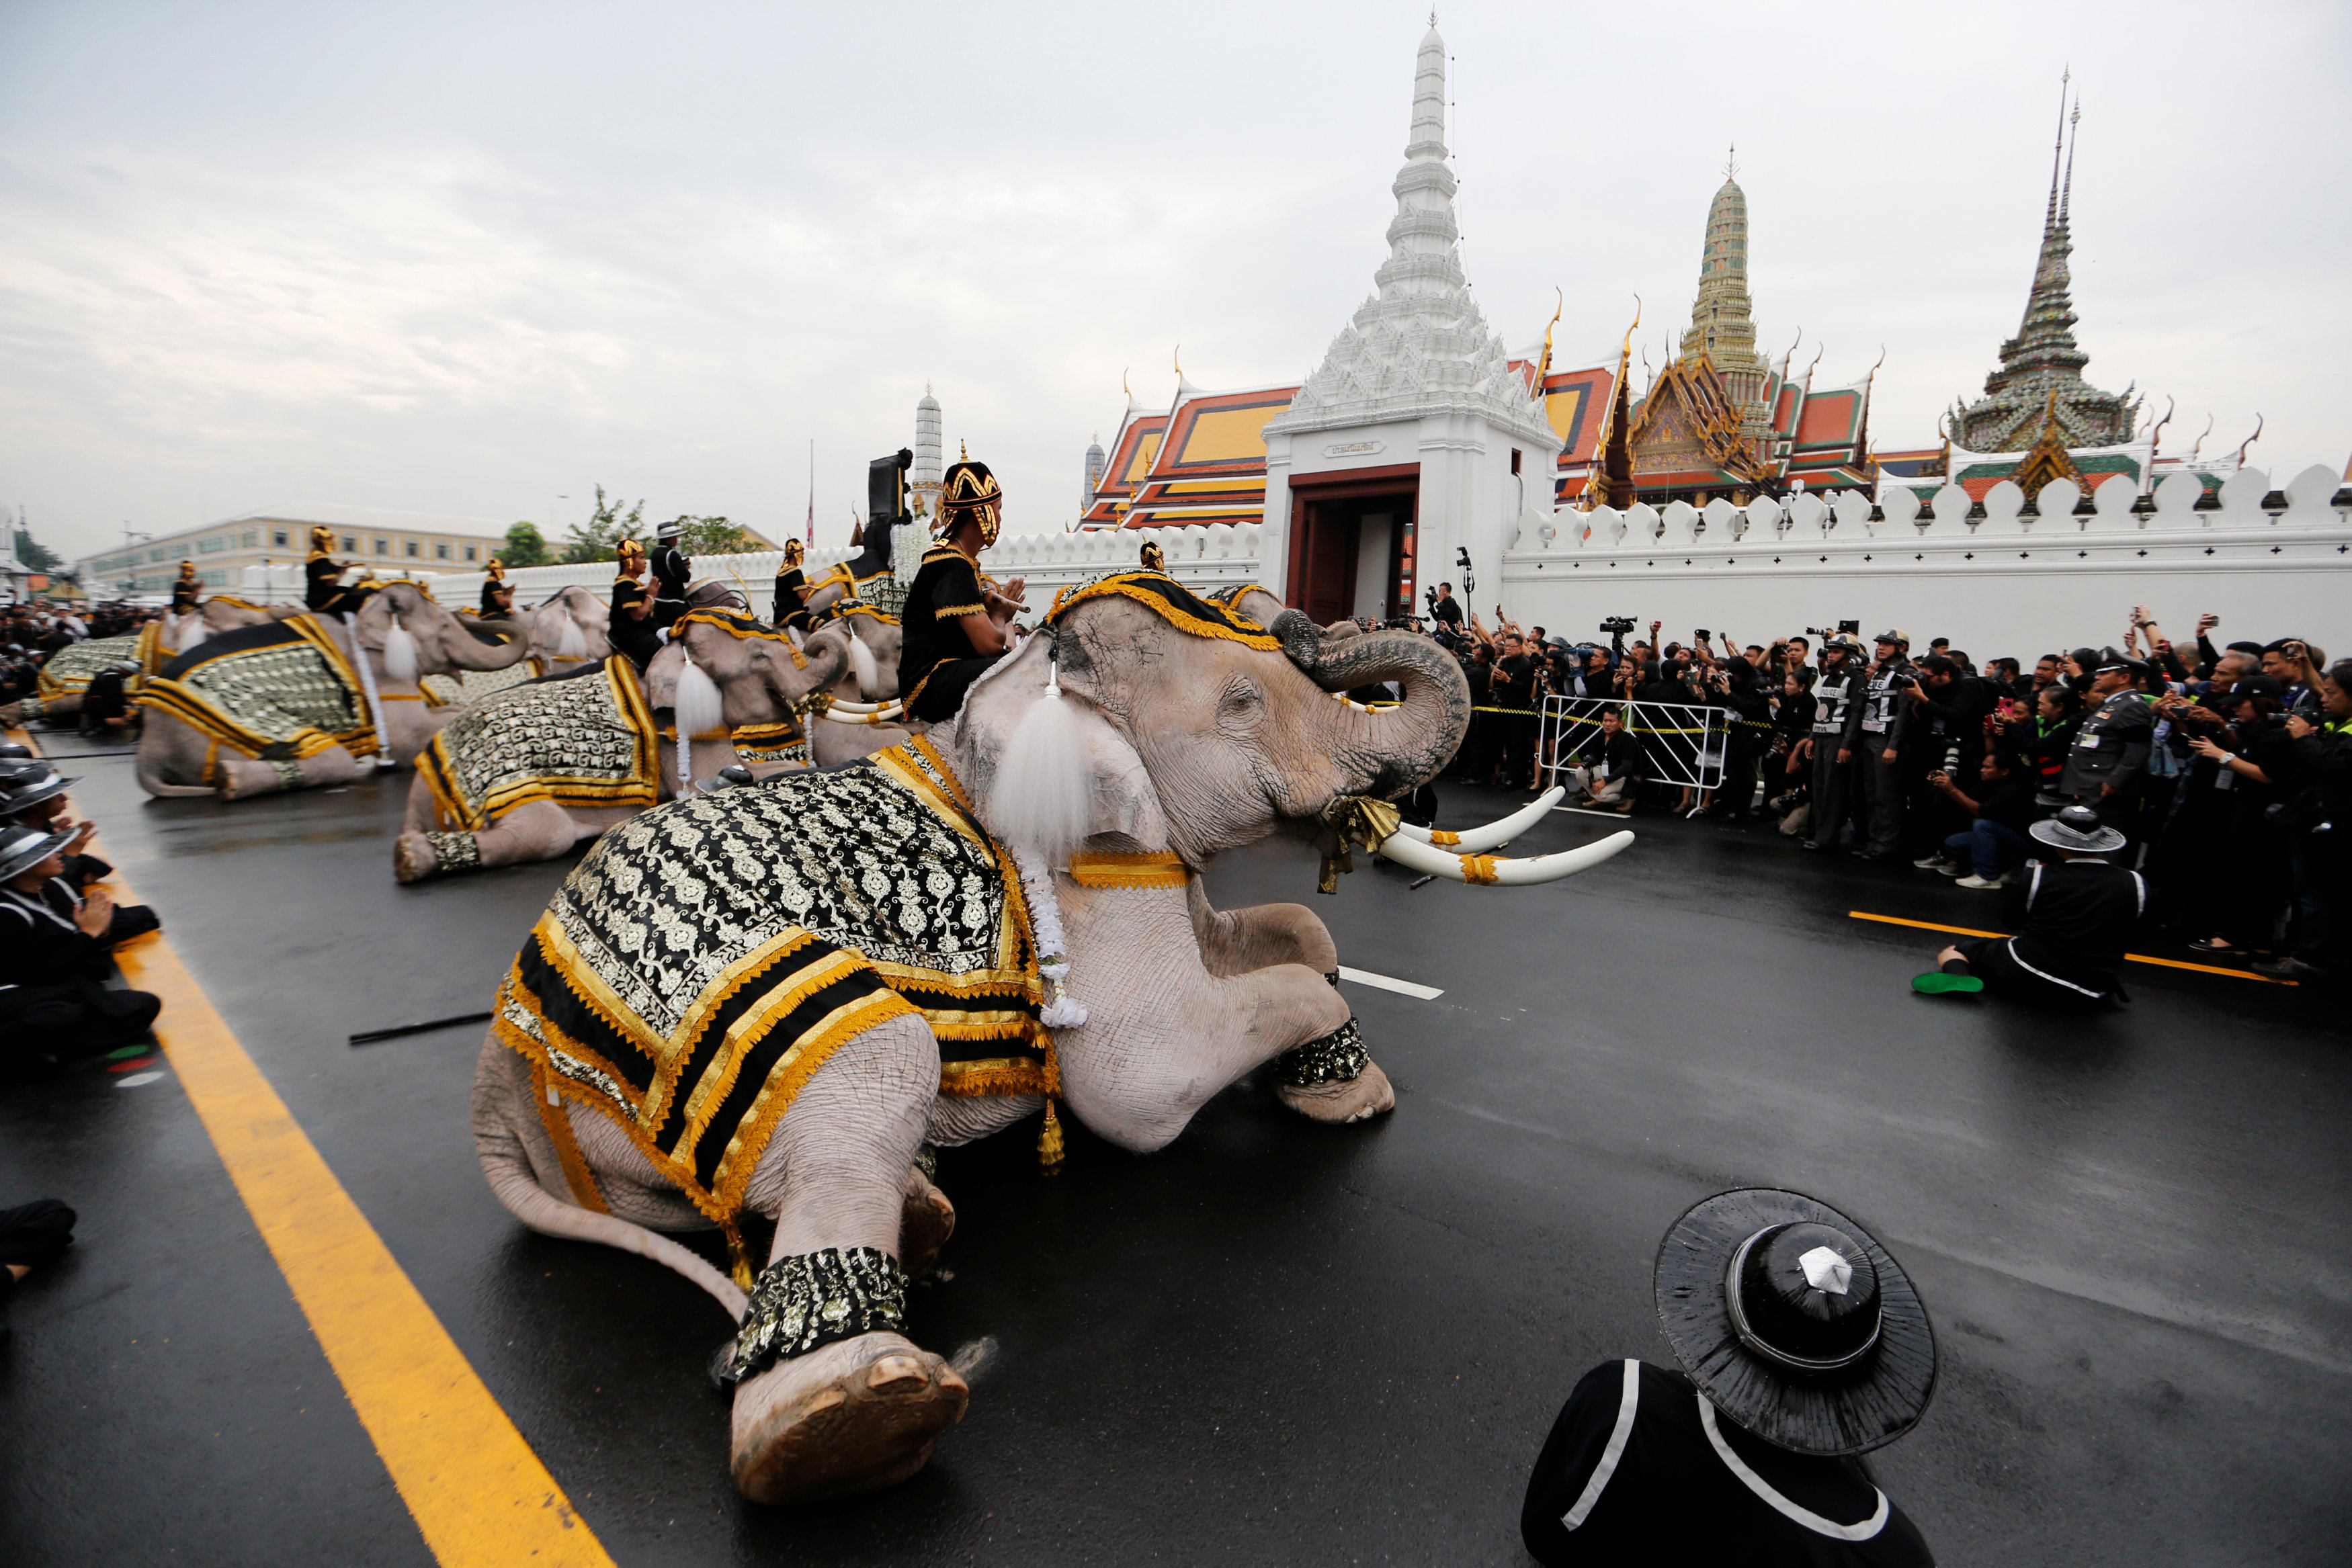 Ayuthaya elephants and mahouts pay their respects at the Royal Palace where Thailand's late king Bhumibol Adulyadej is lying in state, in Bangkok, Thailand November 8, 2016. REUTERS/Jorge Silva TPX IMAGES OF THE DAYn